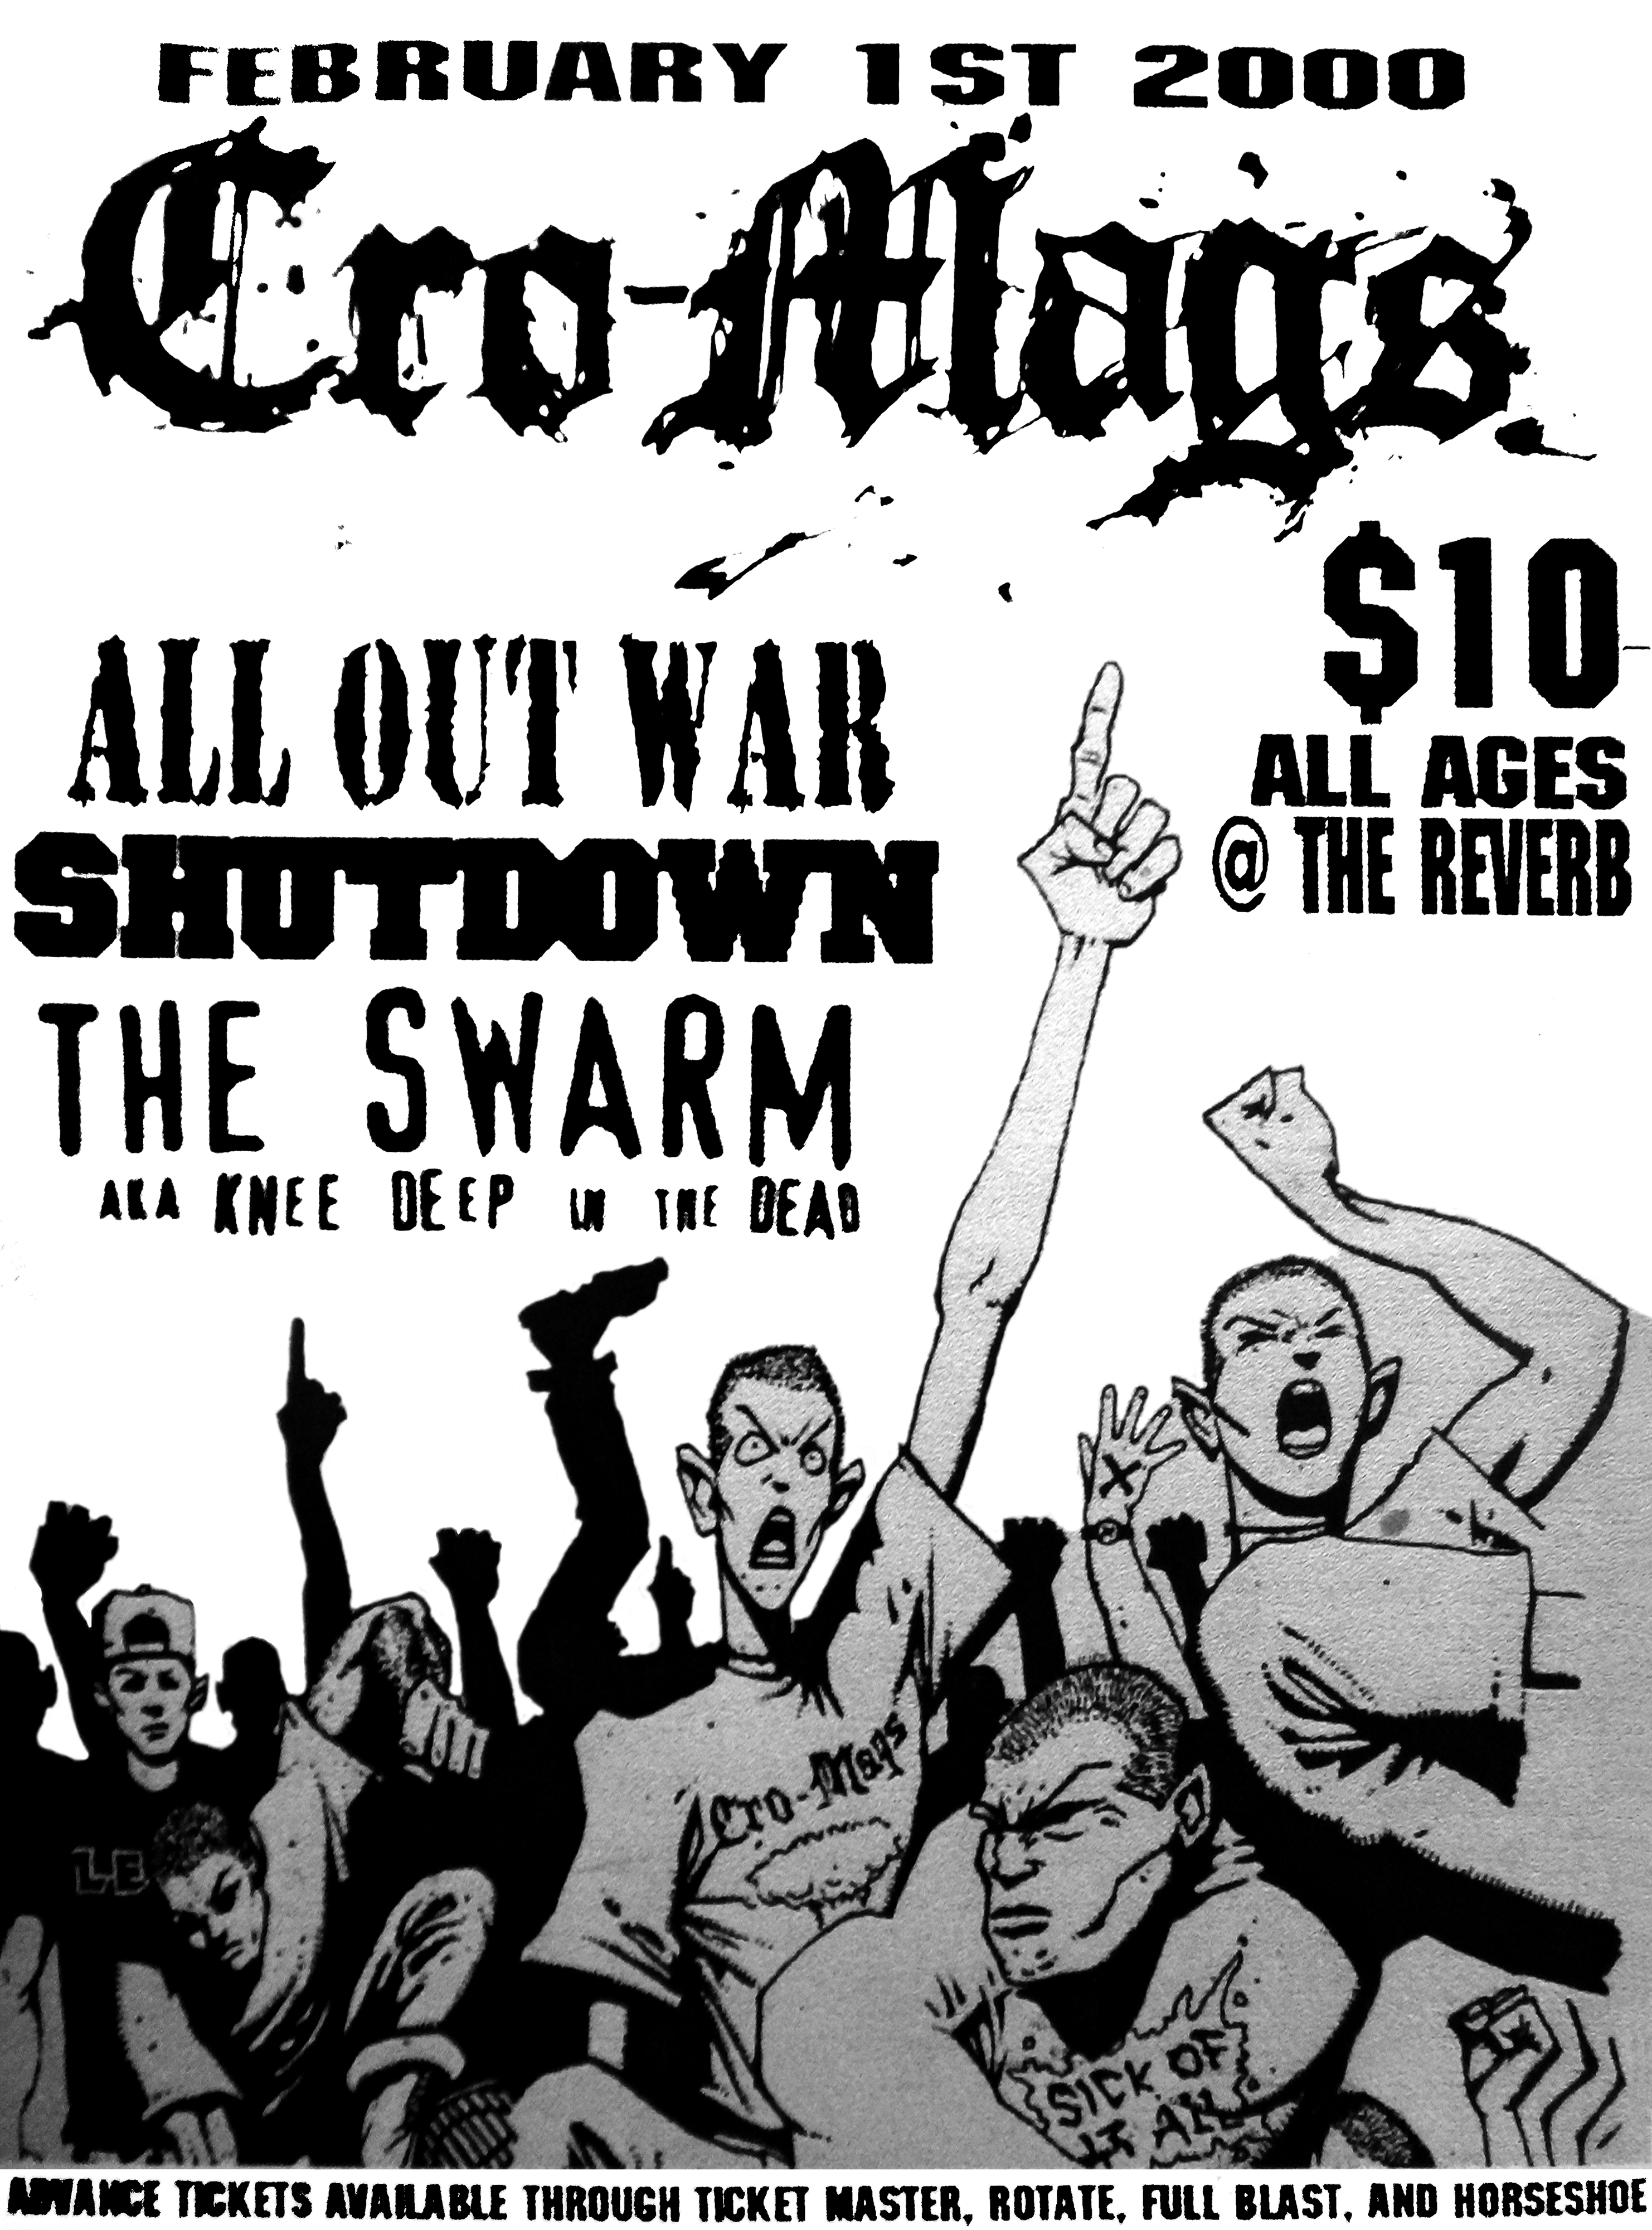 February 1st 2000. The Swarm at The Reverb (Toronto, ON). With Cro-Mags, All Out War, Shutdown